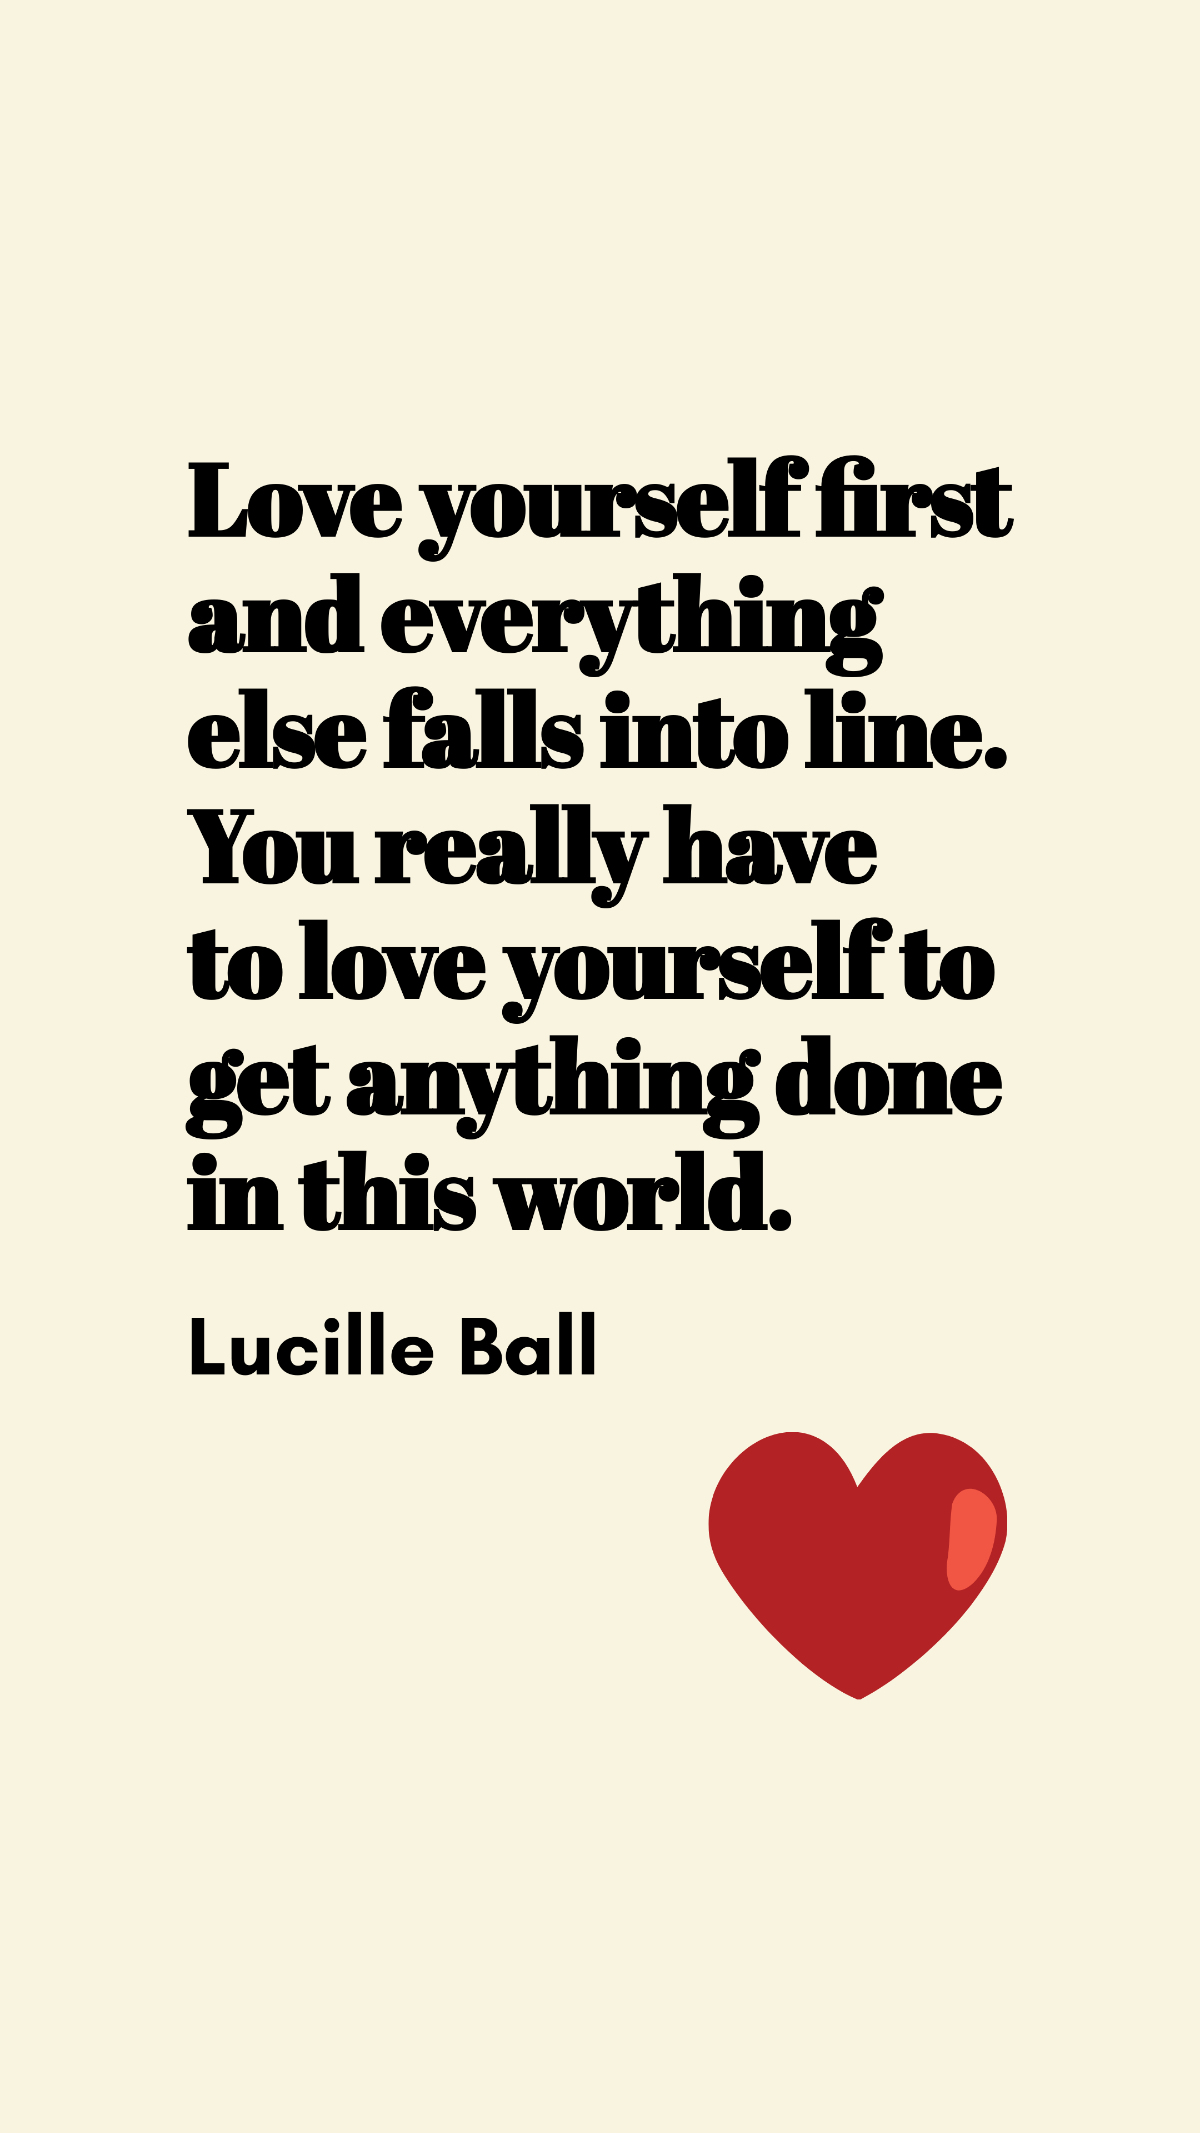 Free Lucille Ball - Love yourself first and everything else falls into line. You really have to love yourself to get anything done in this world. Template